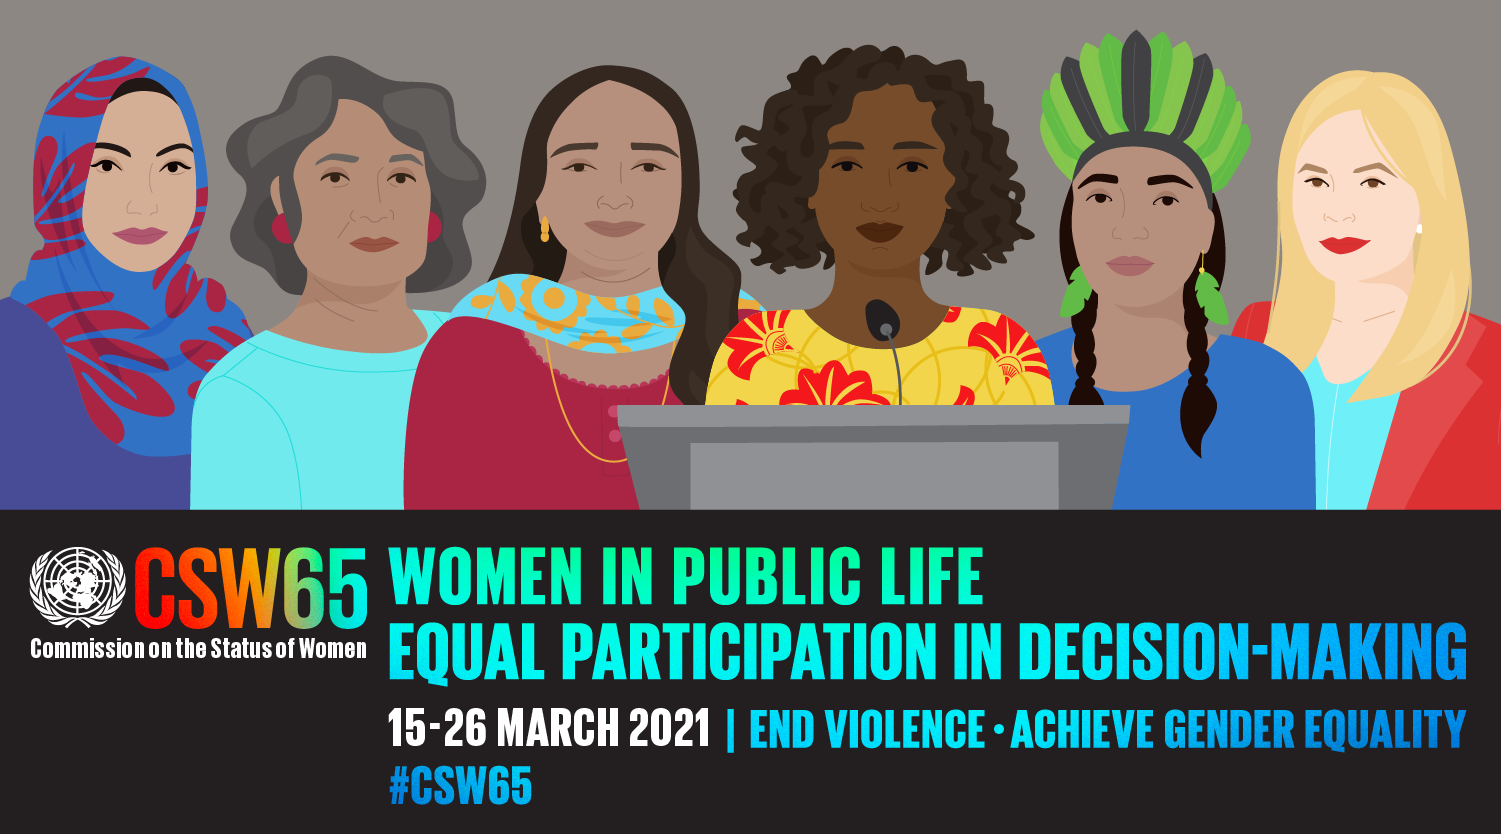 Commission on the Status of Women International Women's Day Graphic